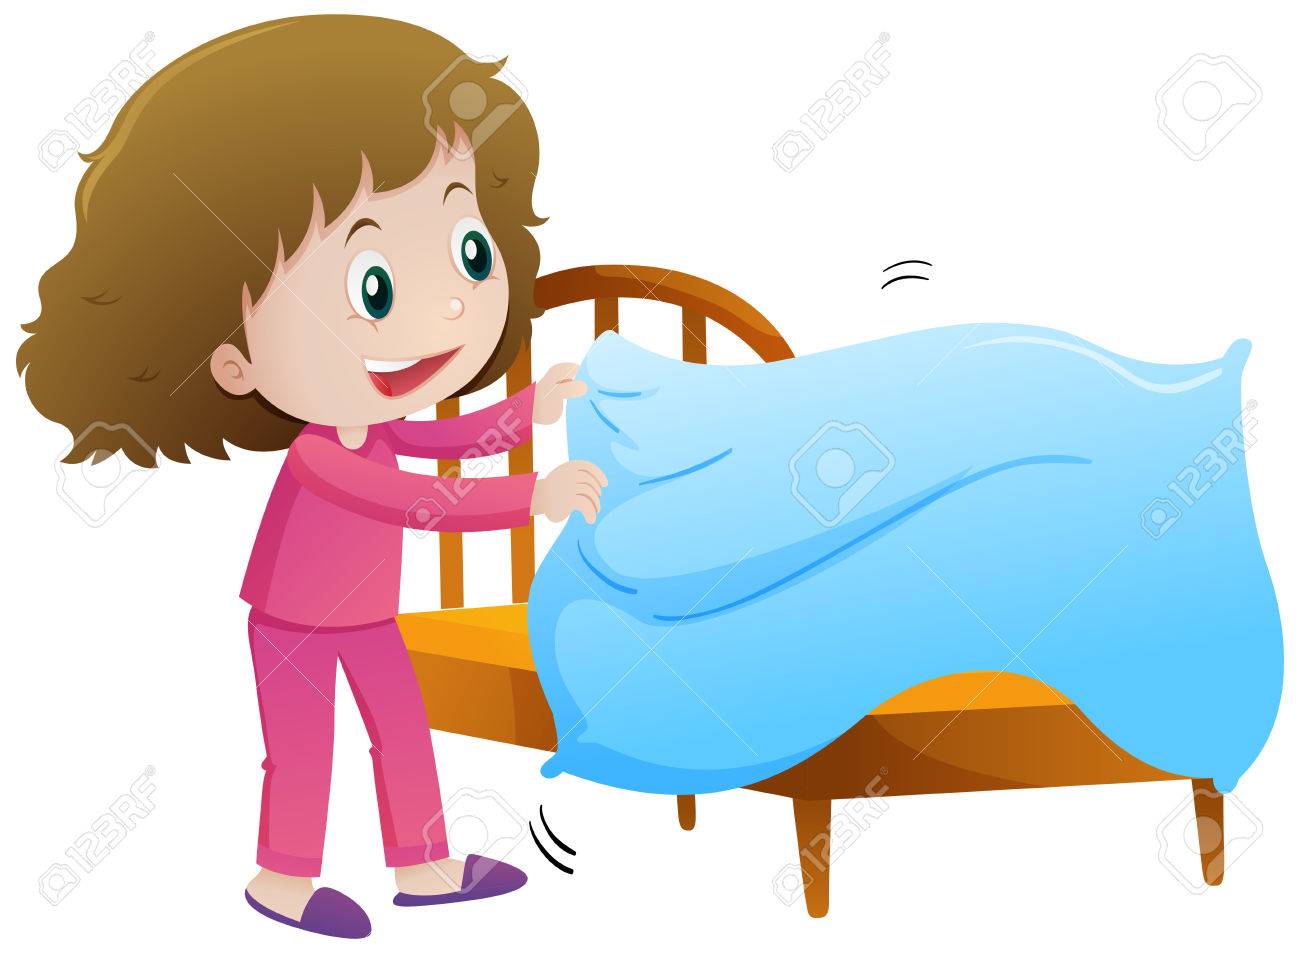 Making Bed Clipart.